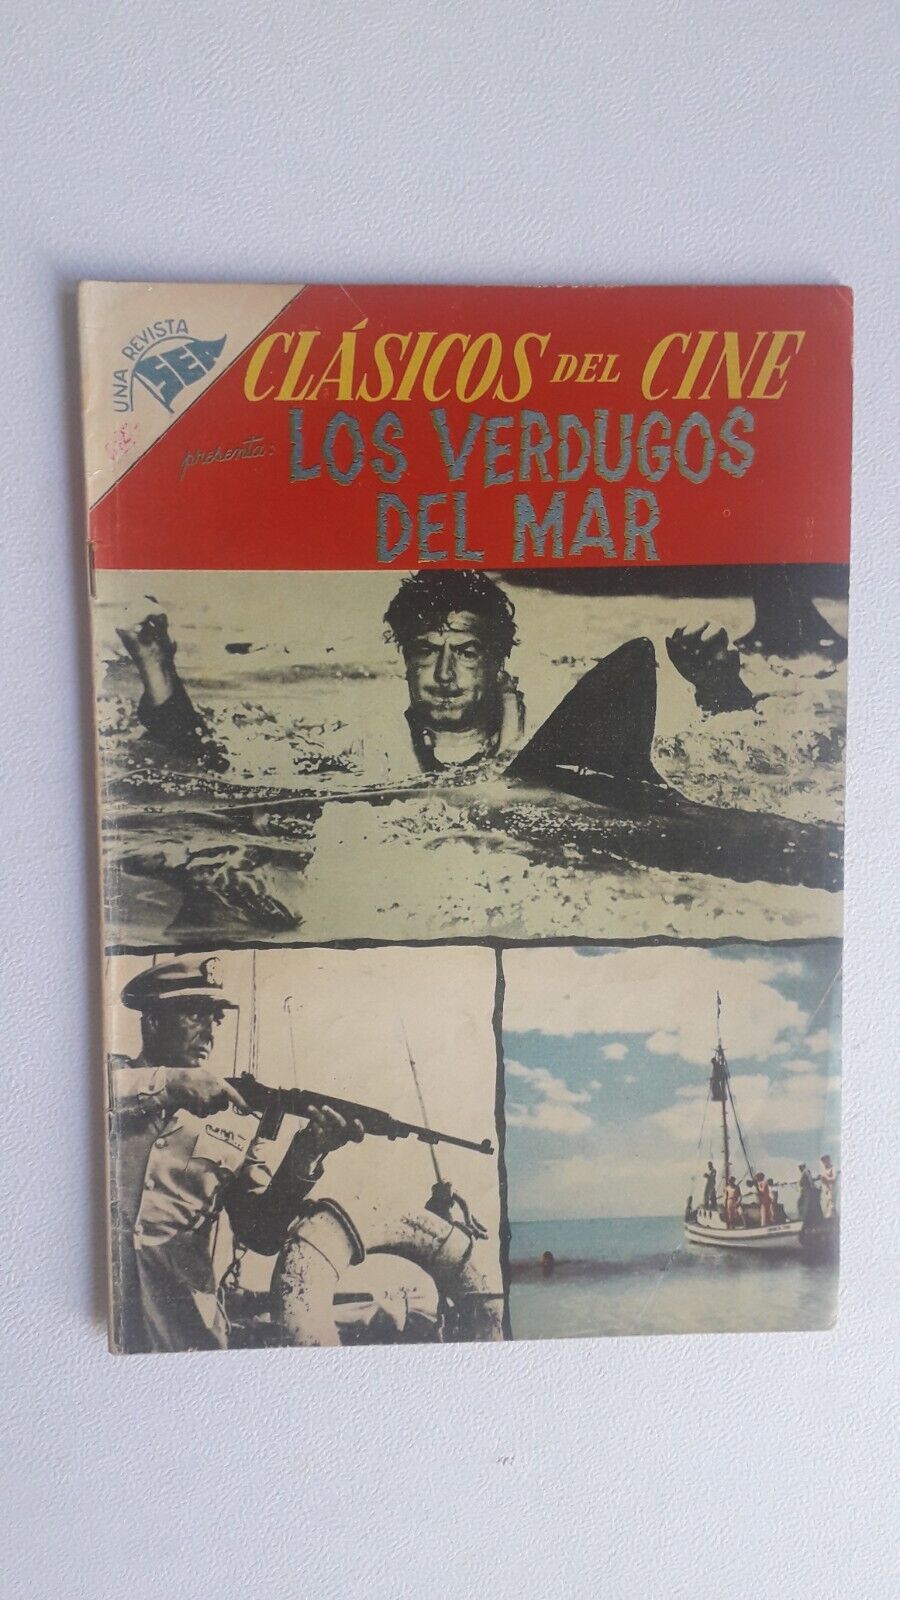 VICTOR MATURE - THE SHARKFIGHTERS - CLASICOS DEL CINE #16 - COMIC IN SPANISH